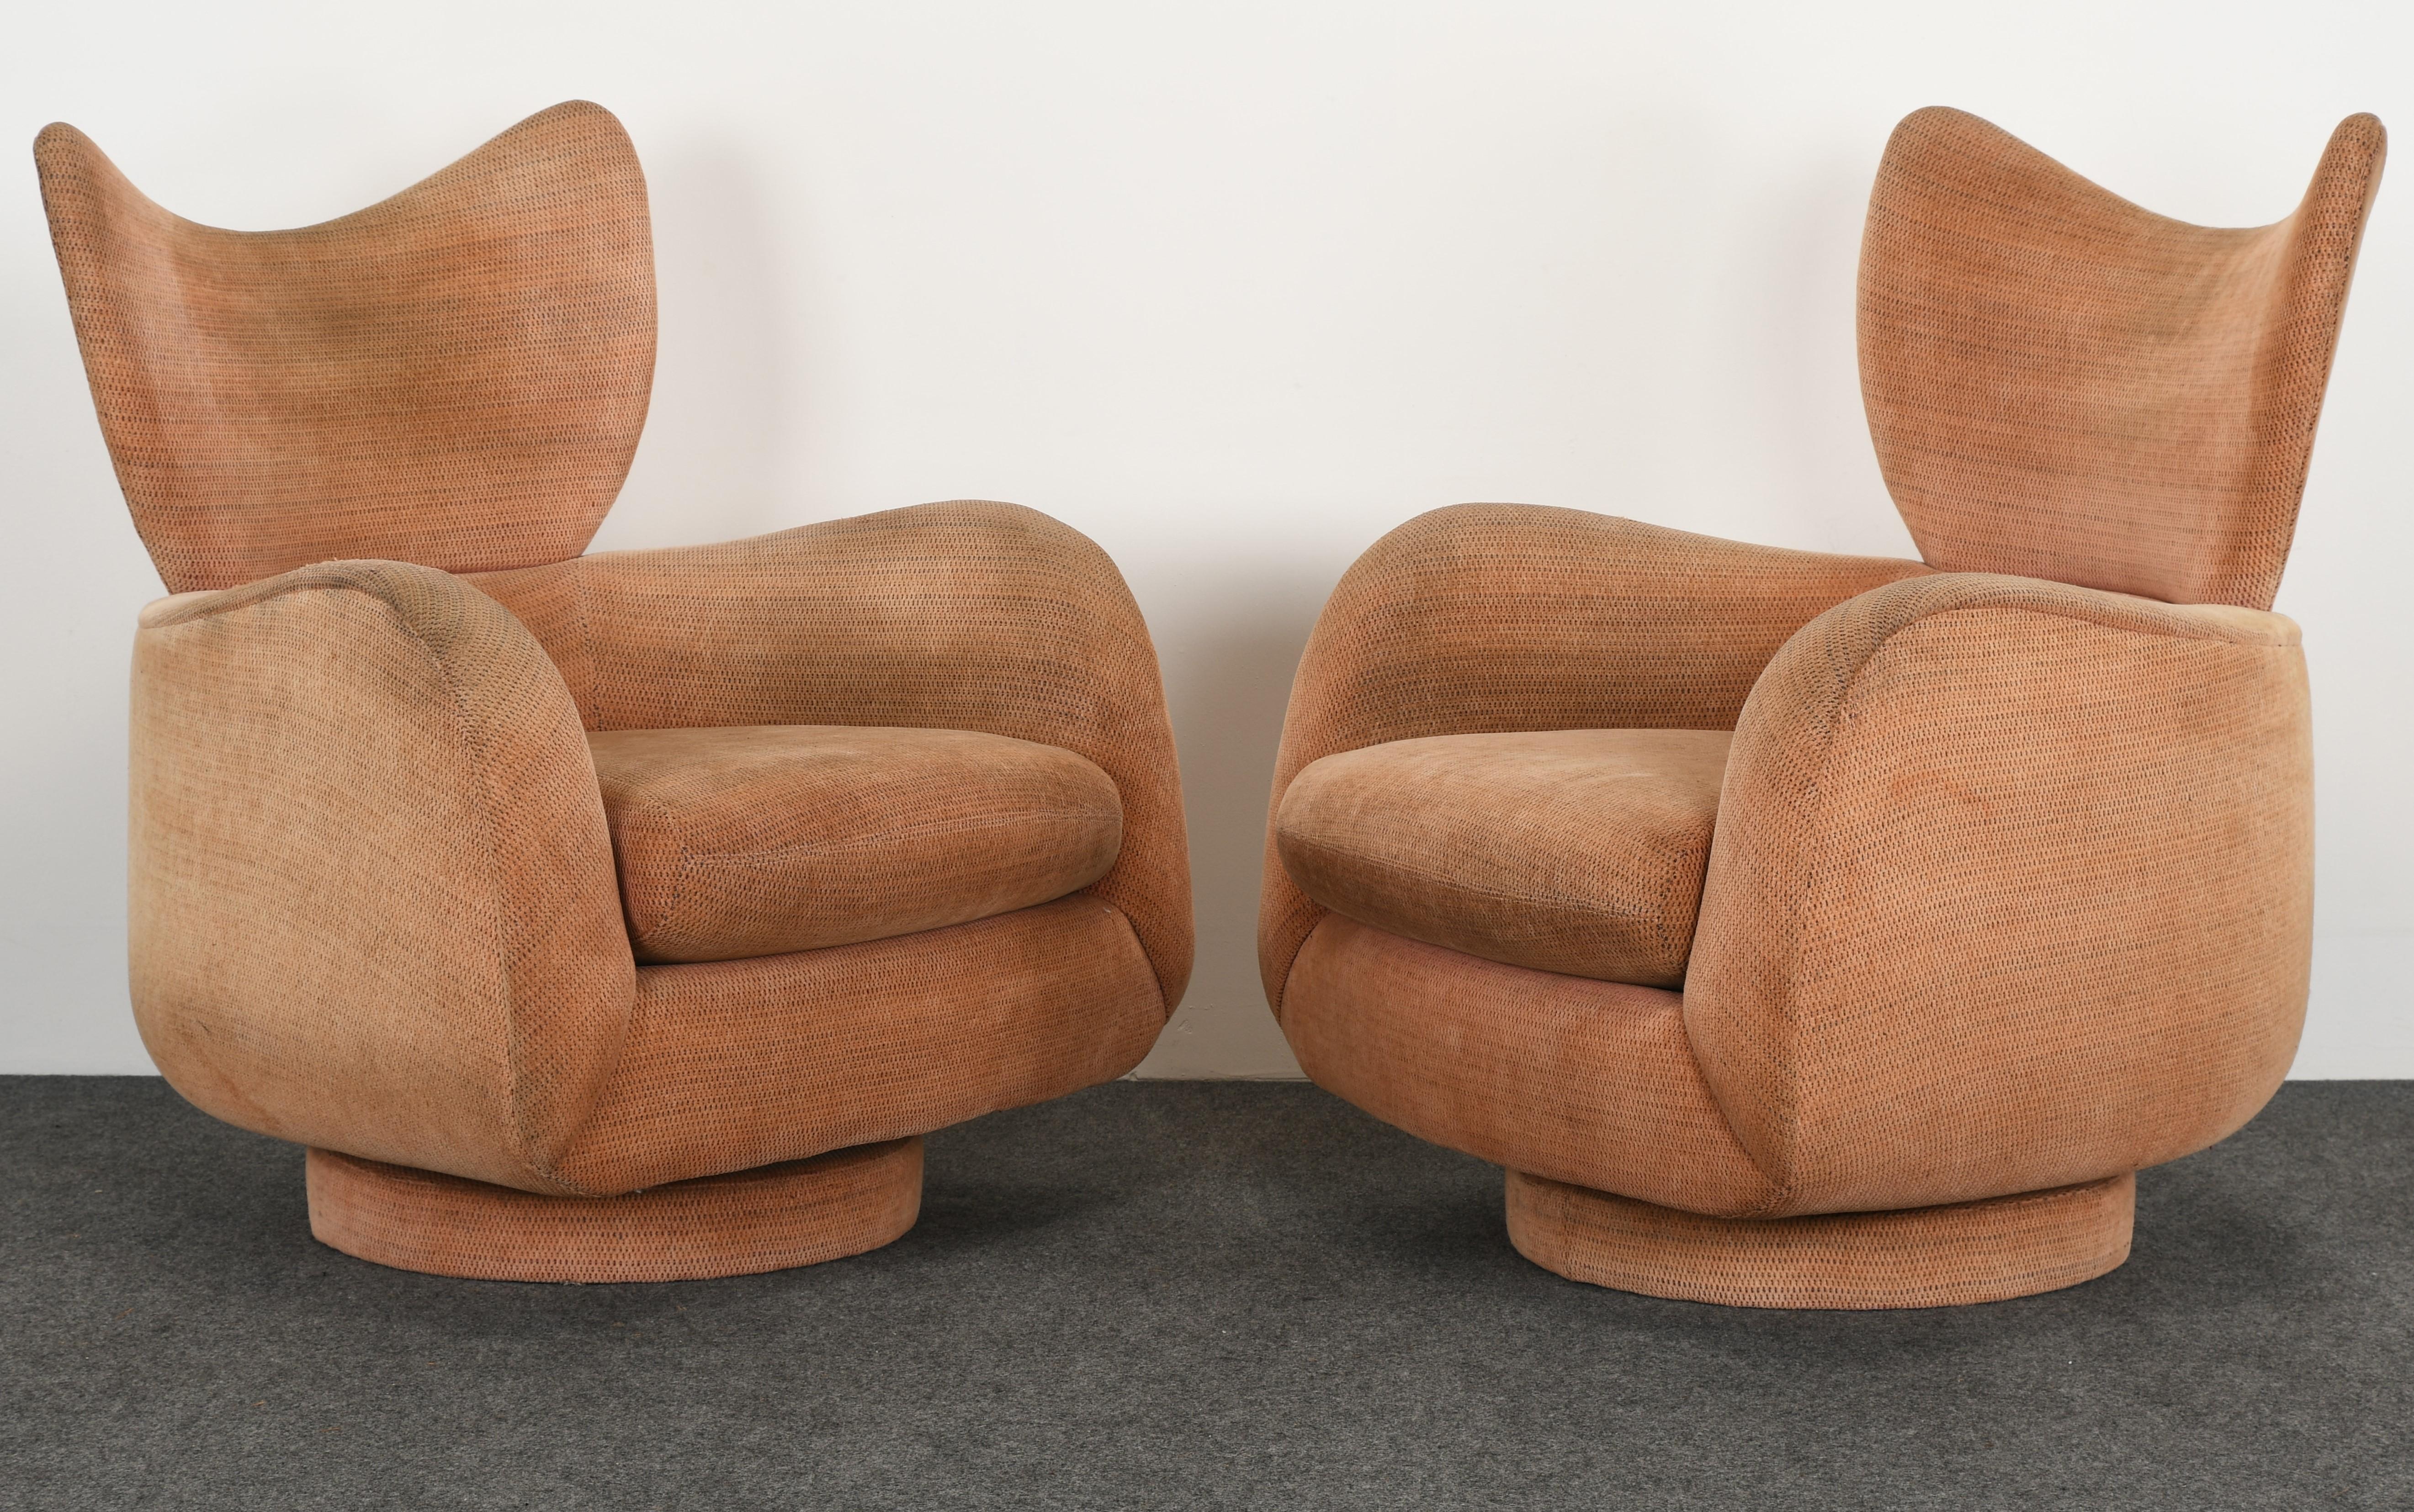 A fabulous pair of Vladimir Kagan wingback swivel and rock chairs originally from the 1980s era. Great shape and form to reupholster in your choice of fabric. Condition: Mechanism works well for swivel and rock features.

Dimensions: 39.5